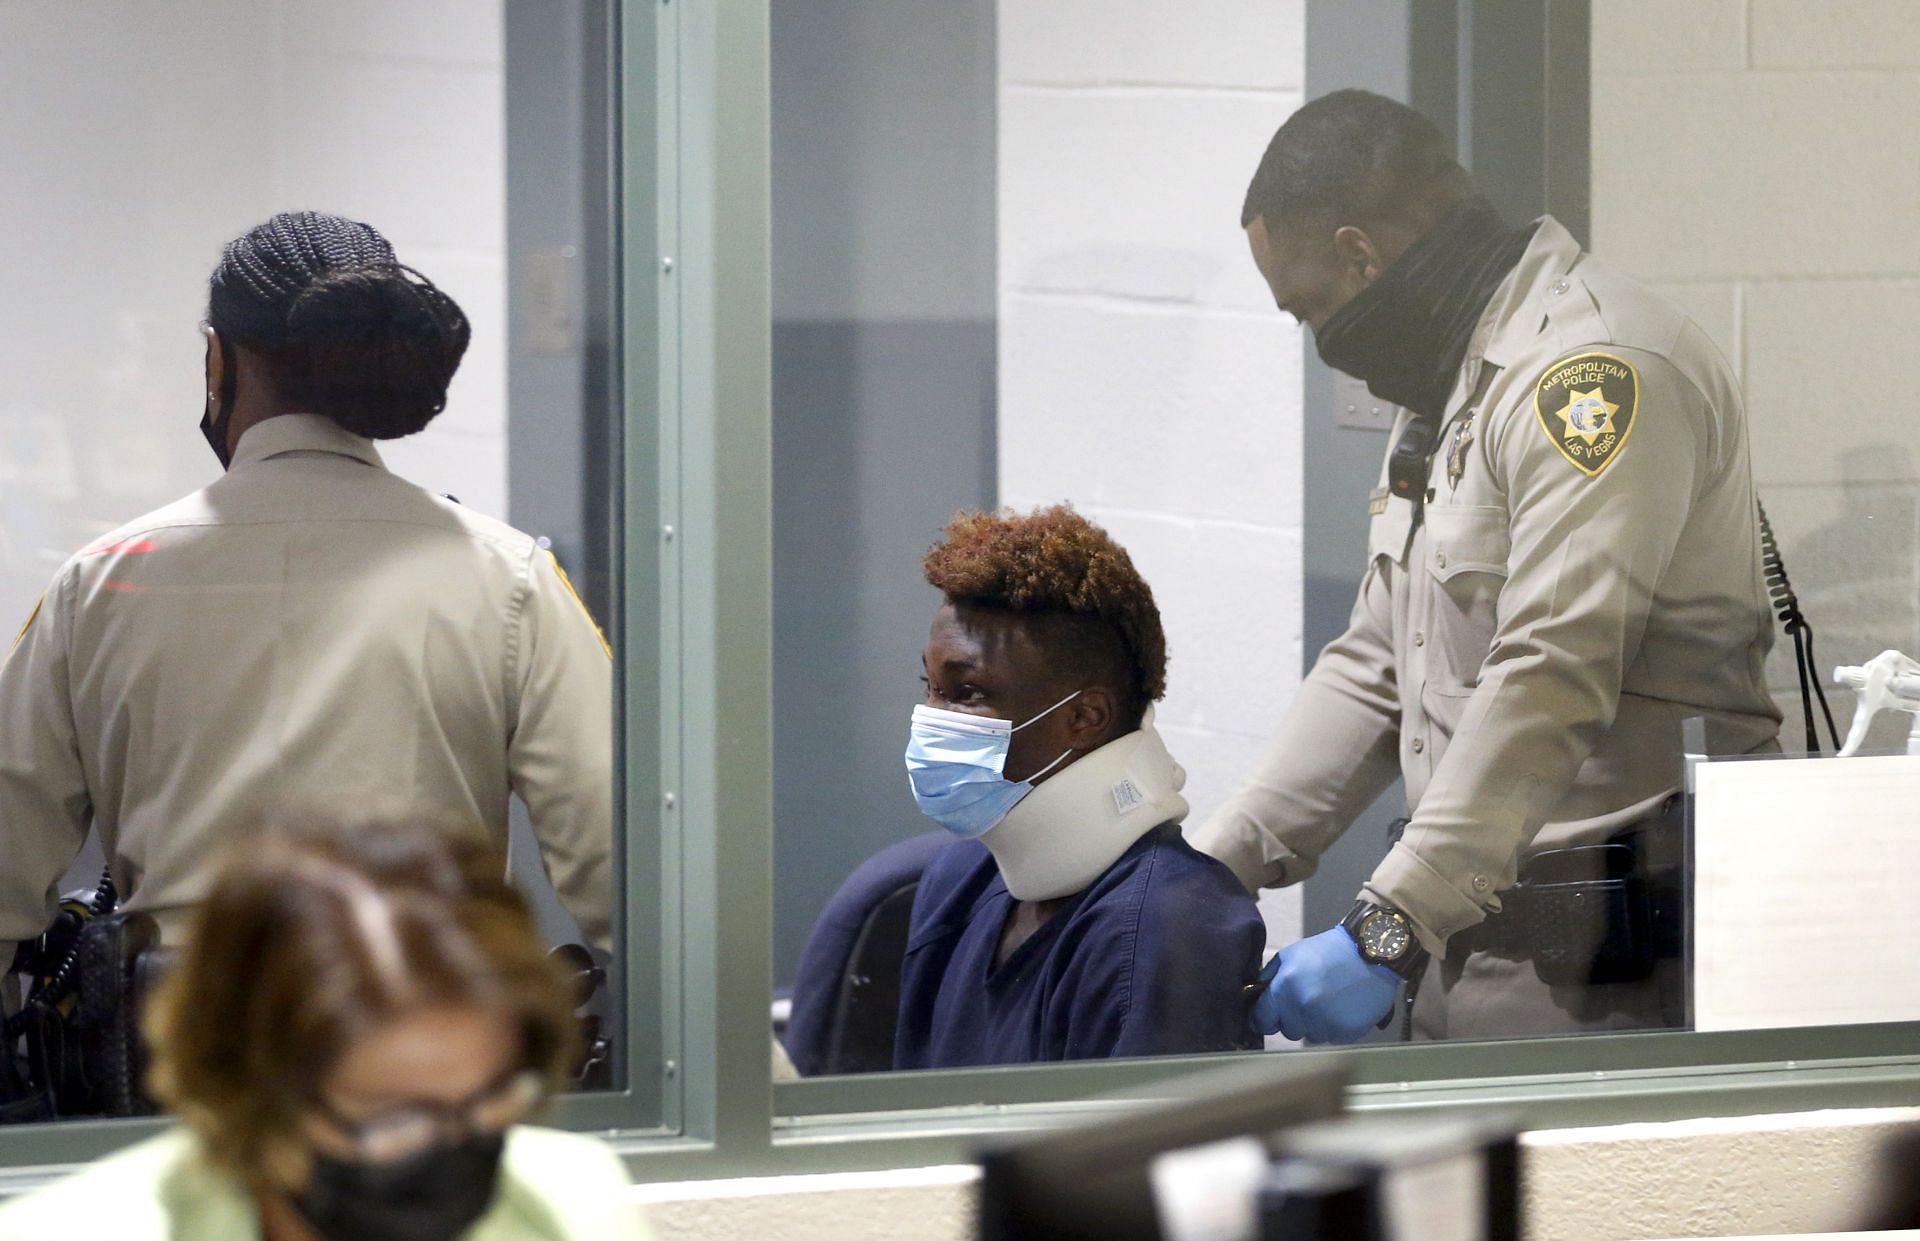 Las Vegas Raiders Wide Receiver Henry Ruggs III Appears In Court Following Fatal DUI Crash